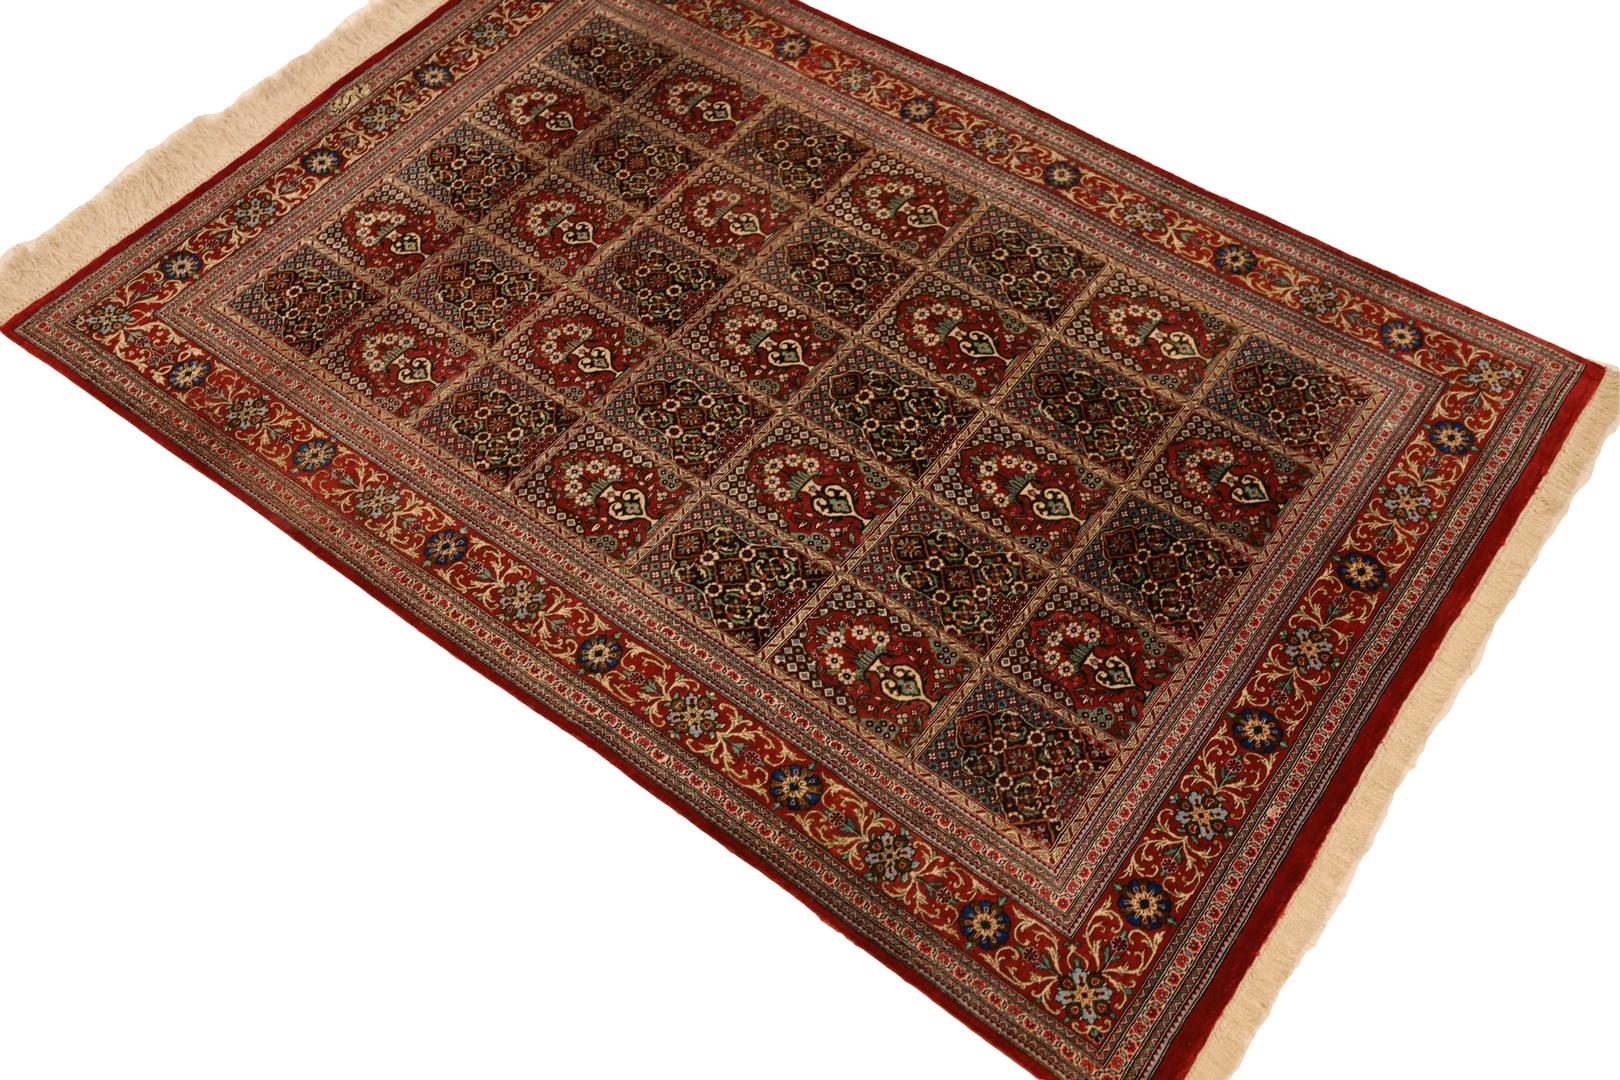 Introducing the Exquisite Silk Qum Garden Pattern Rug

Elevate your home decor with the epitome of opulence – the Silk Qum Garden Pattern Rug. This masterpiece of craftsmanship and artistry embodies timeless elegance and intricate design, making it